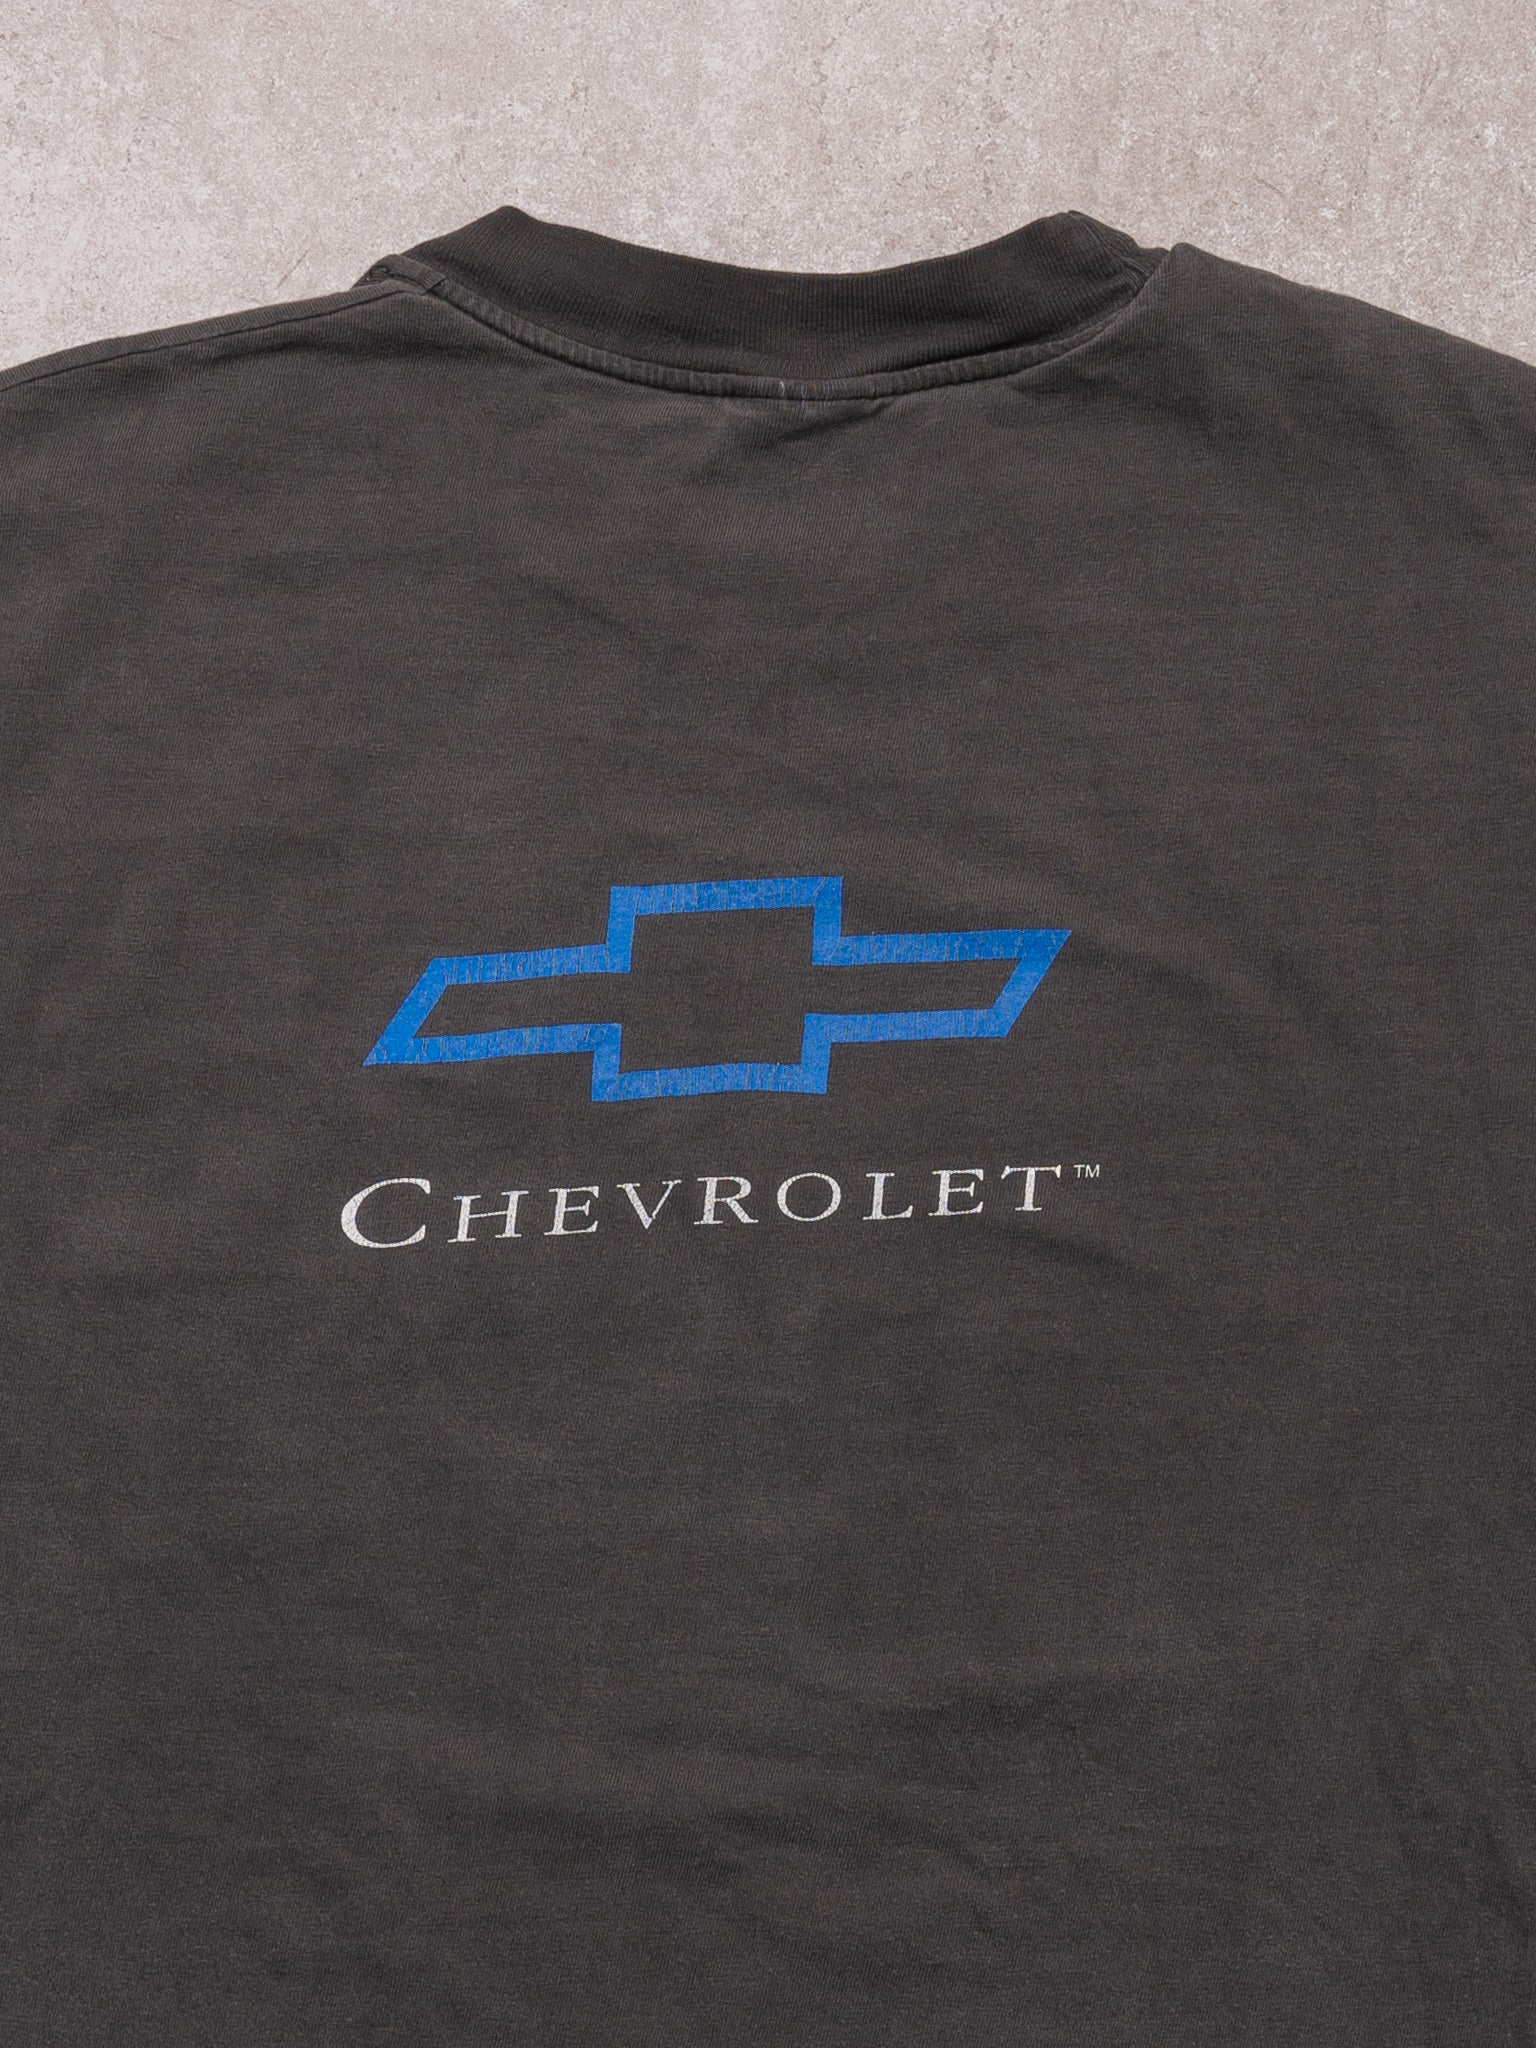 Vintage Grey Tried, Tested and True Chevrolet Tee (M)